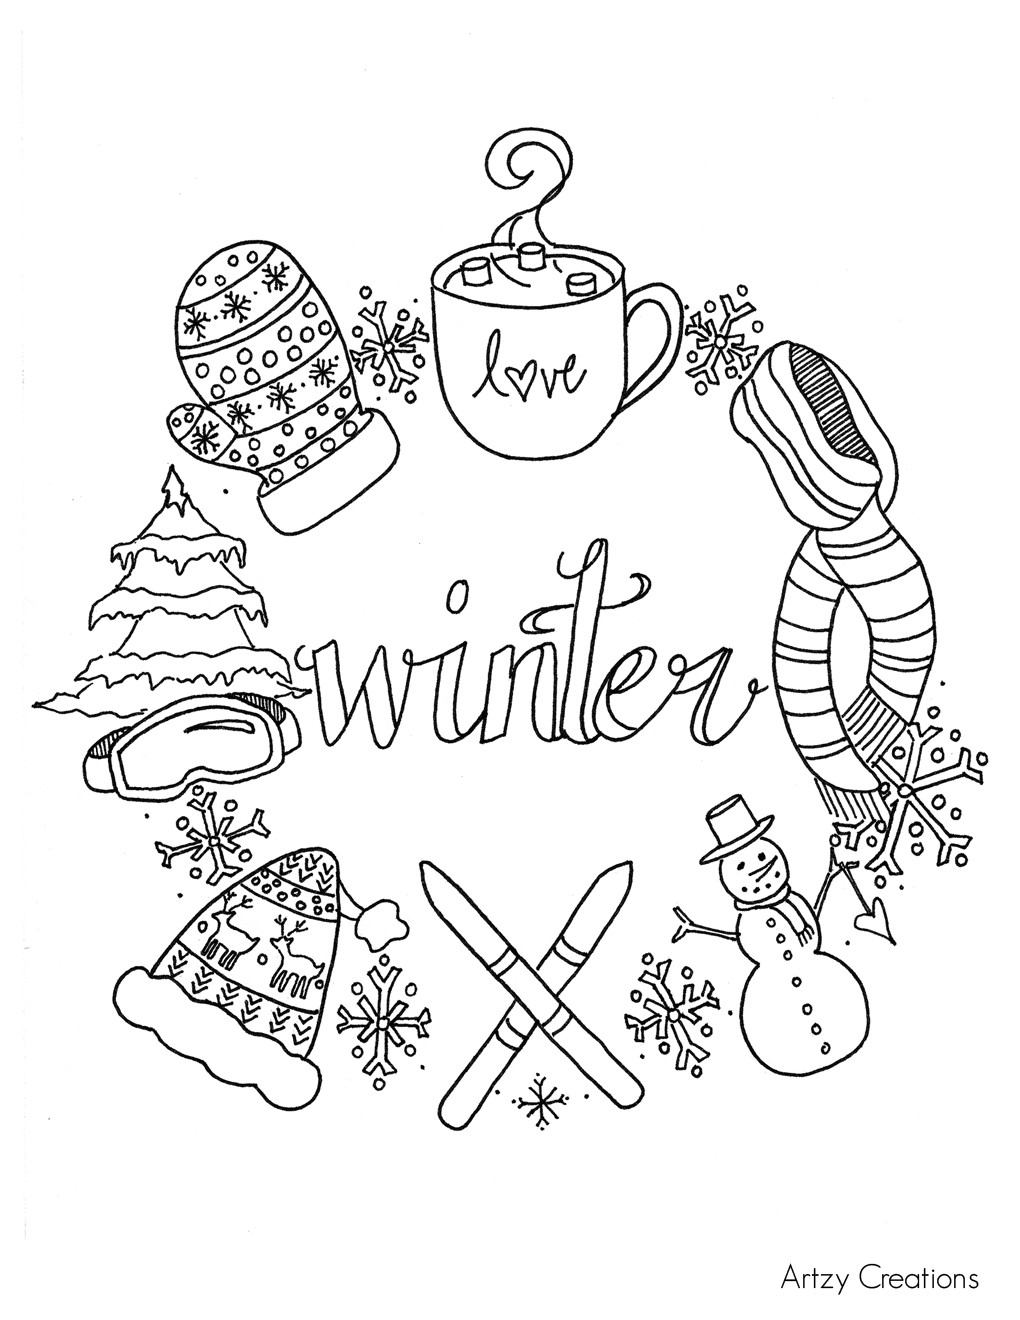 Winter Coloring Sheets For Kids
 Free Winter Coloring Page artzycreations